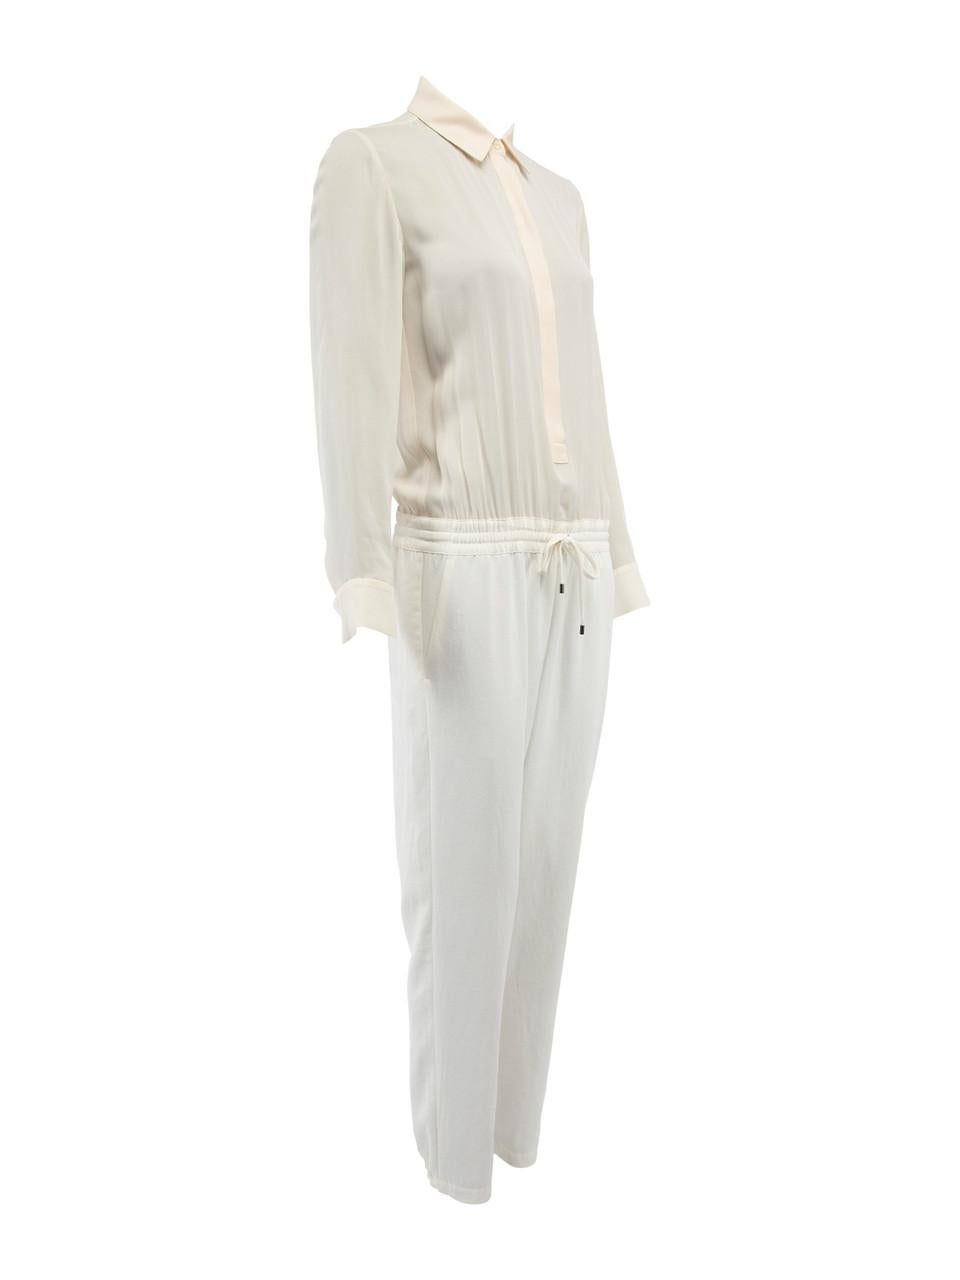 CONDITION is Very good. Minimal wear to jumpsuit is evident. Minimal marks seen to the right sleeve on this used Vince designer resale item. 
 
 
 
 Details
 
 
 Cream
 
 Silk
 
 Jumpsuit
 
 Long sleeves
 
 Collared
 
 Button up top
 
 Buttoned